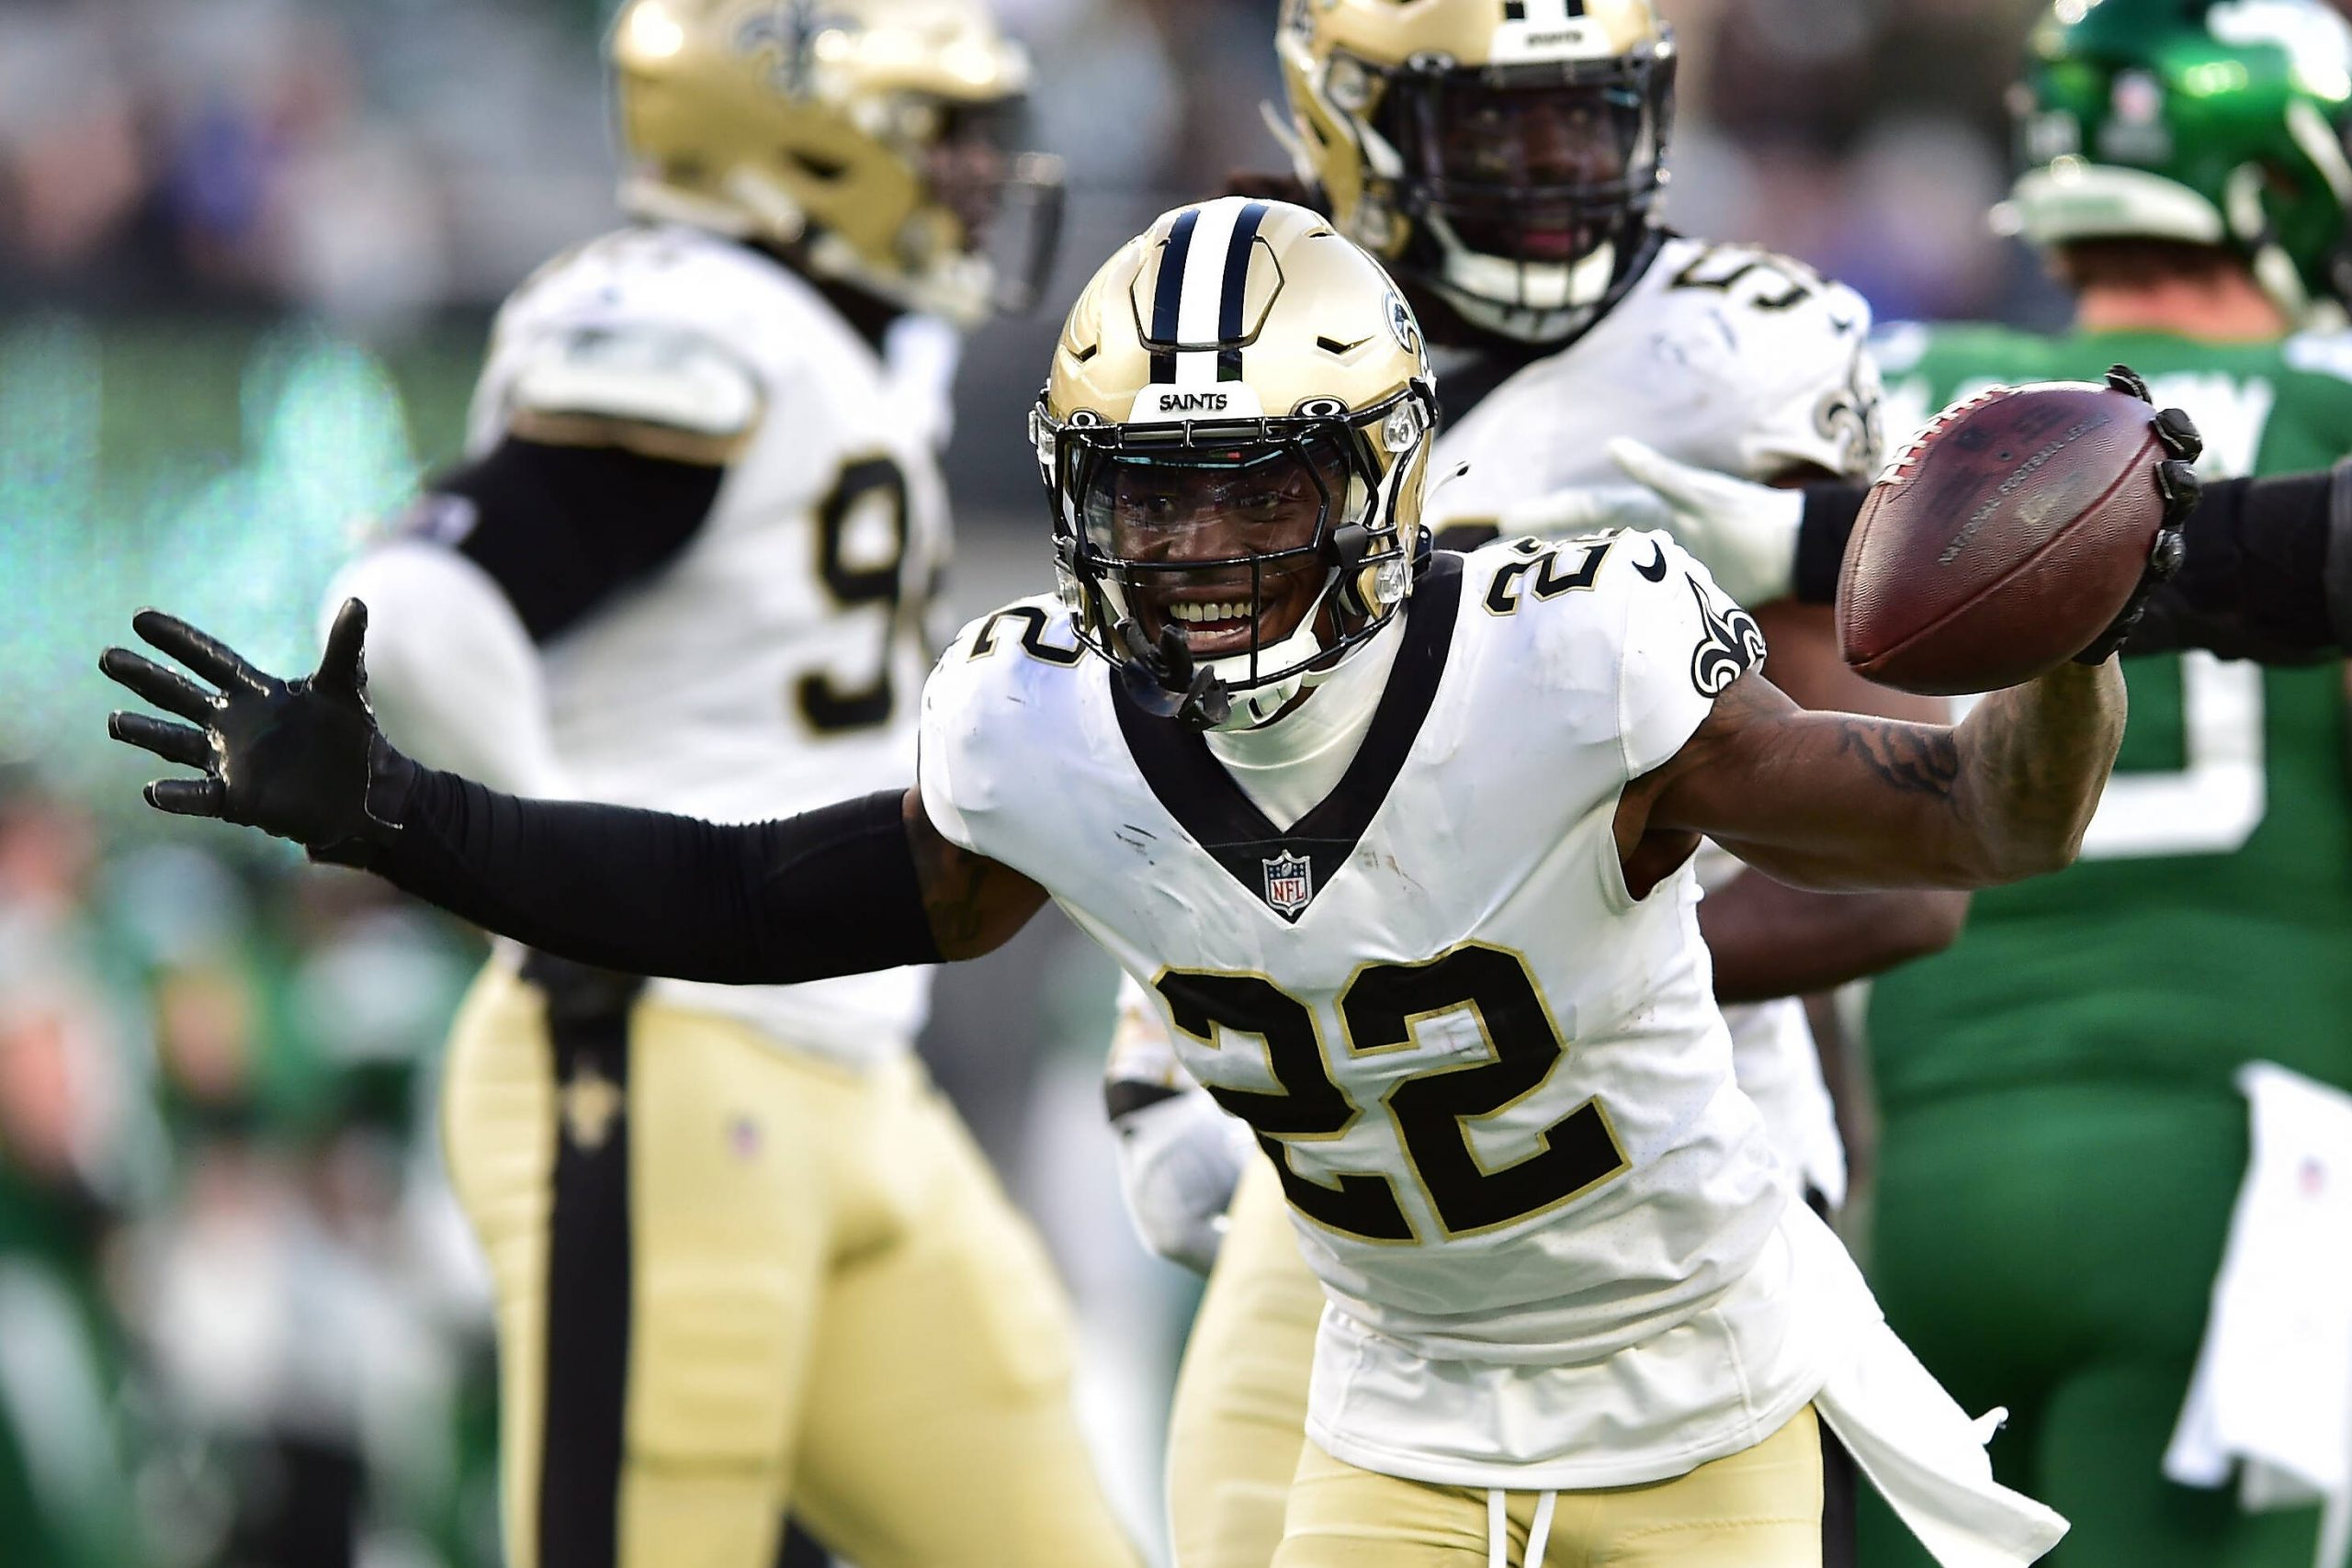 December 12, 2021, East Rutherford, New Jersey, USA: New Orleans Saints tight end CHAUNCEY GARDNER-JOHNSON 22 reacts at MetLife Stadium in East Rutherford New Jersey New Orleans defeats New York 30 to 9 East Rutherford USA - ZUMAa301 20211212_zaf_a301_001 Copyright: xBrooksxVonxArxx